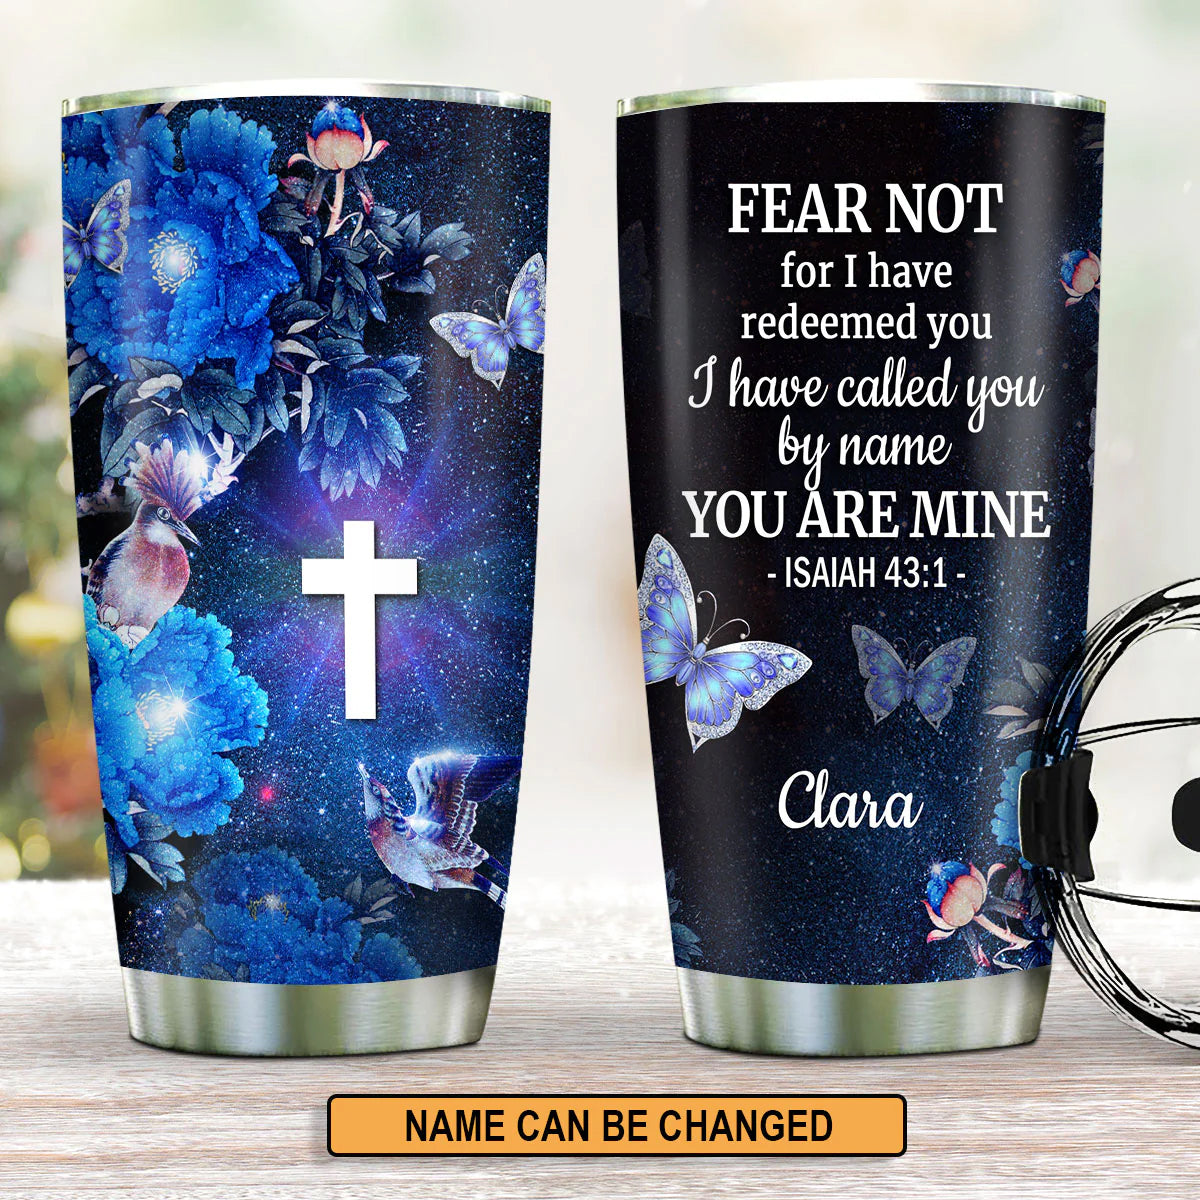 Christianartbag Drinkware, I Have Called You By Name, Personalized Mug, Tumbler, Personalized Gift. - Christian Art Bag